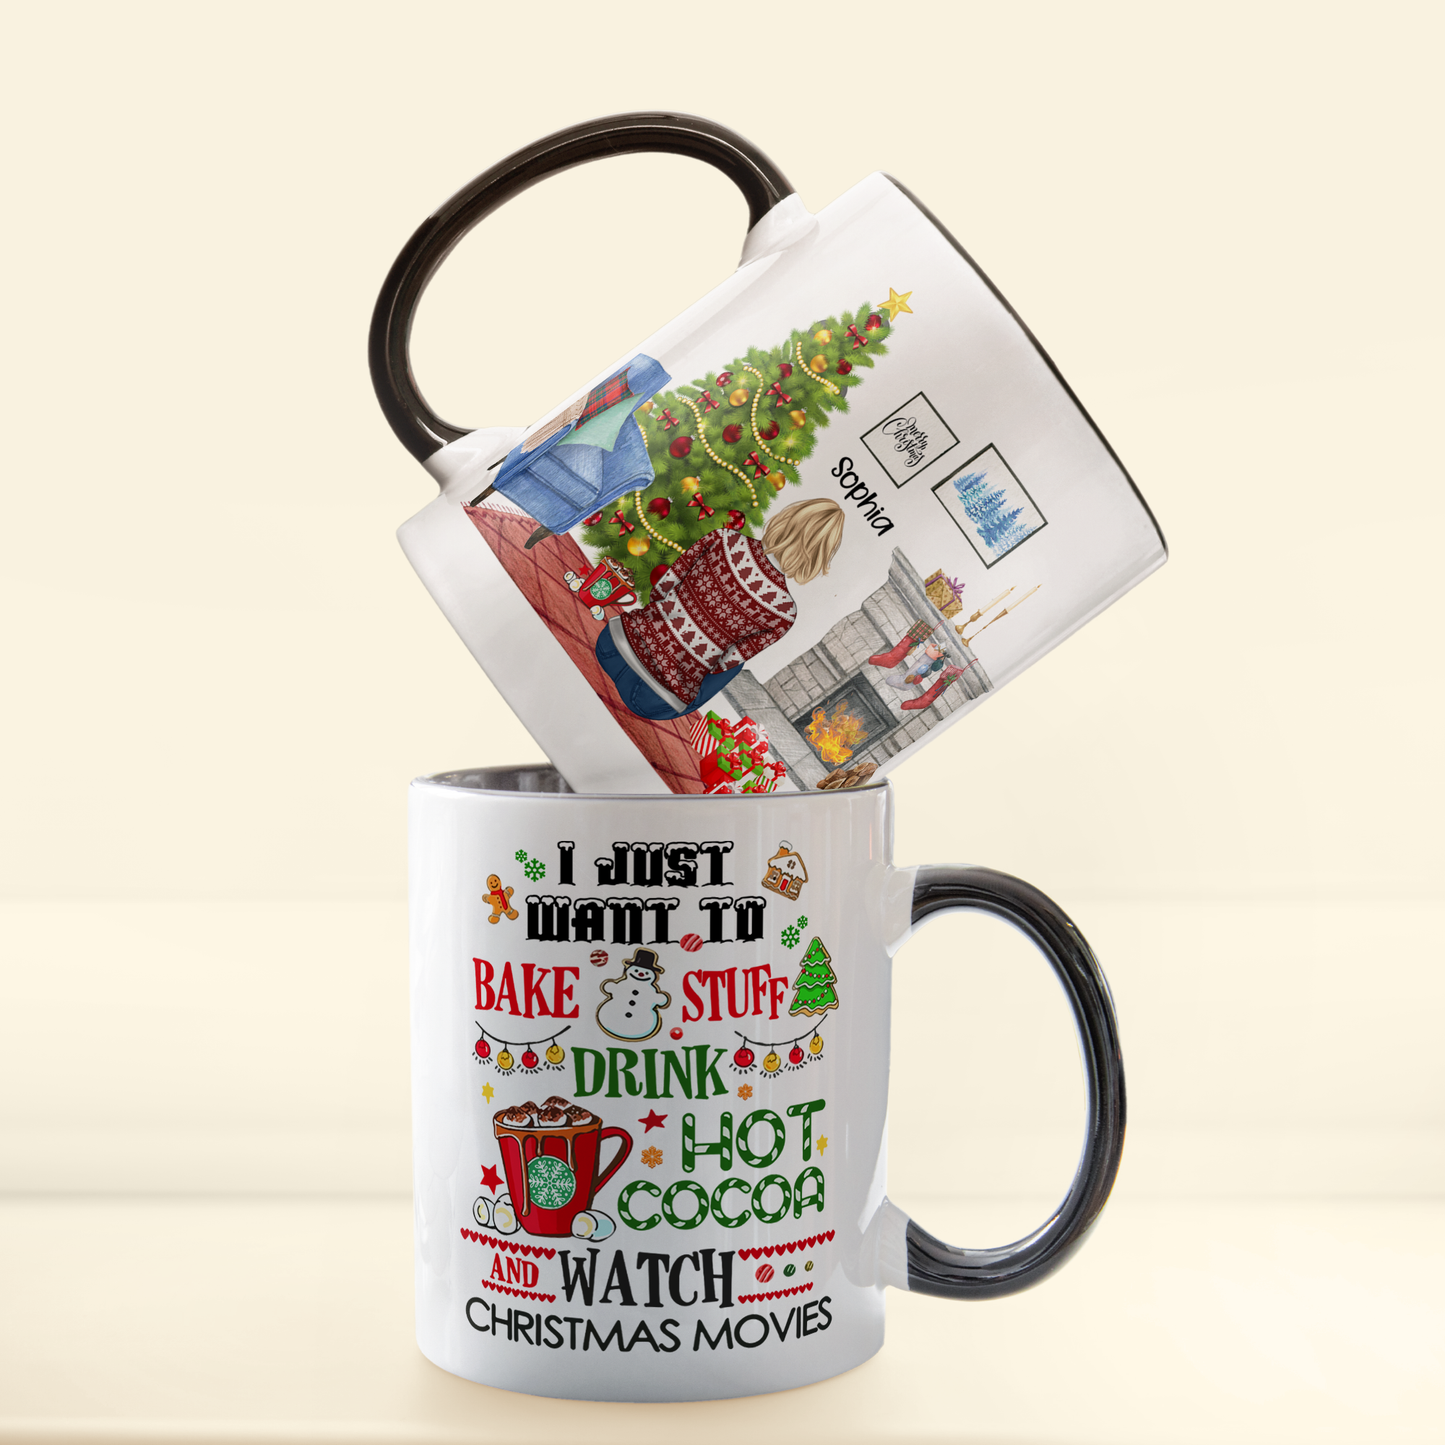 Bake Stuff Drink Hot Cocoa - Personalized Accent Mug